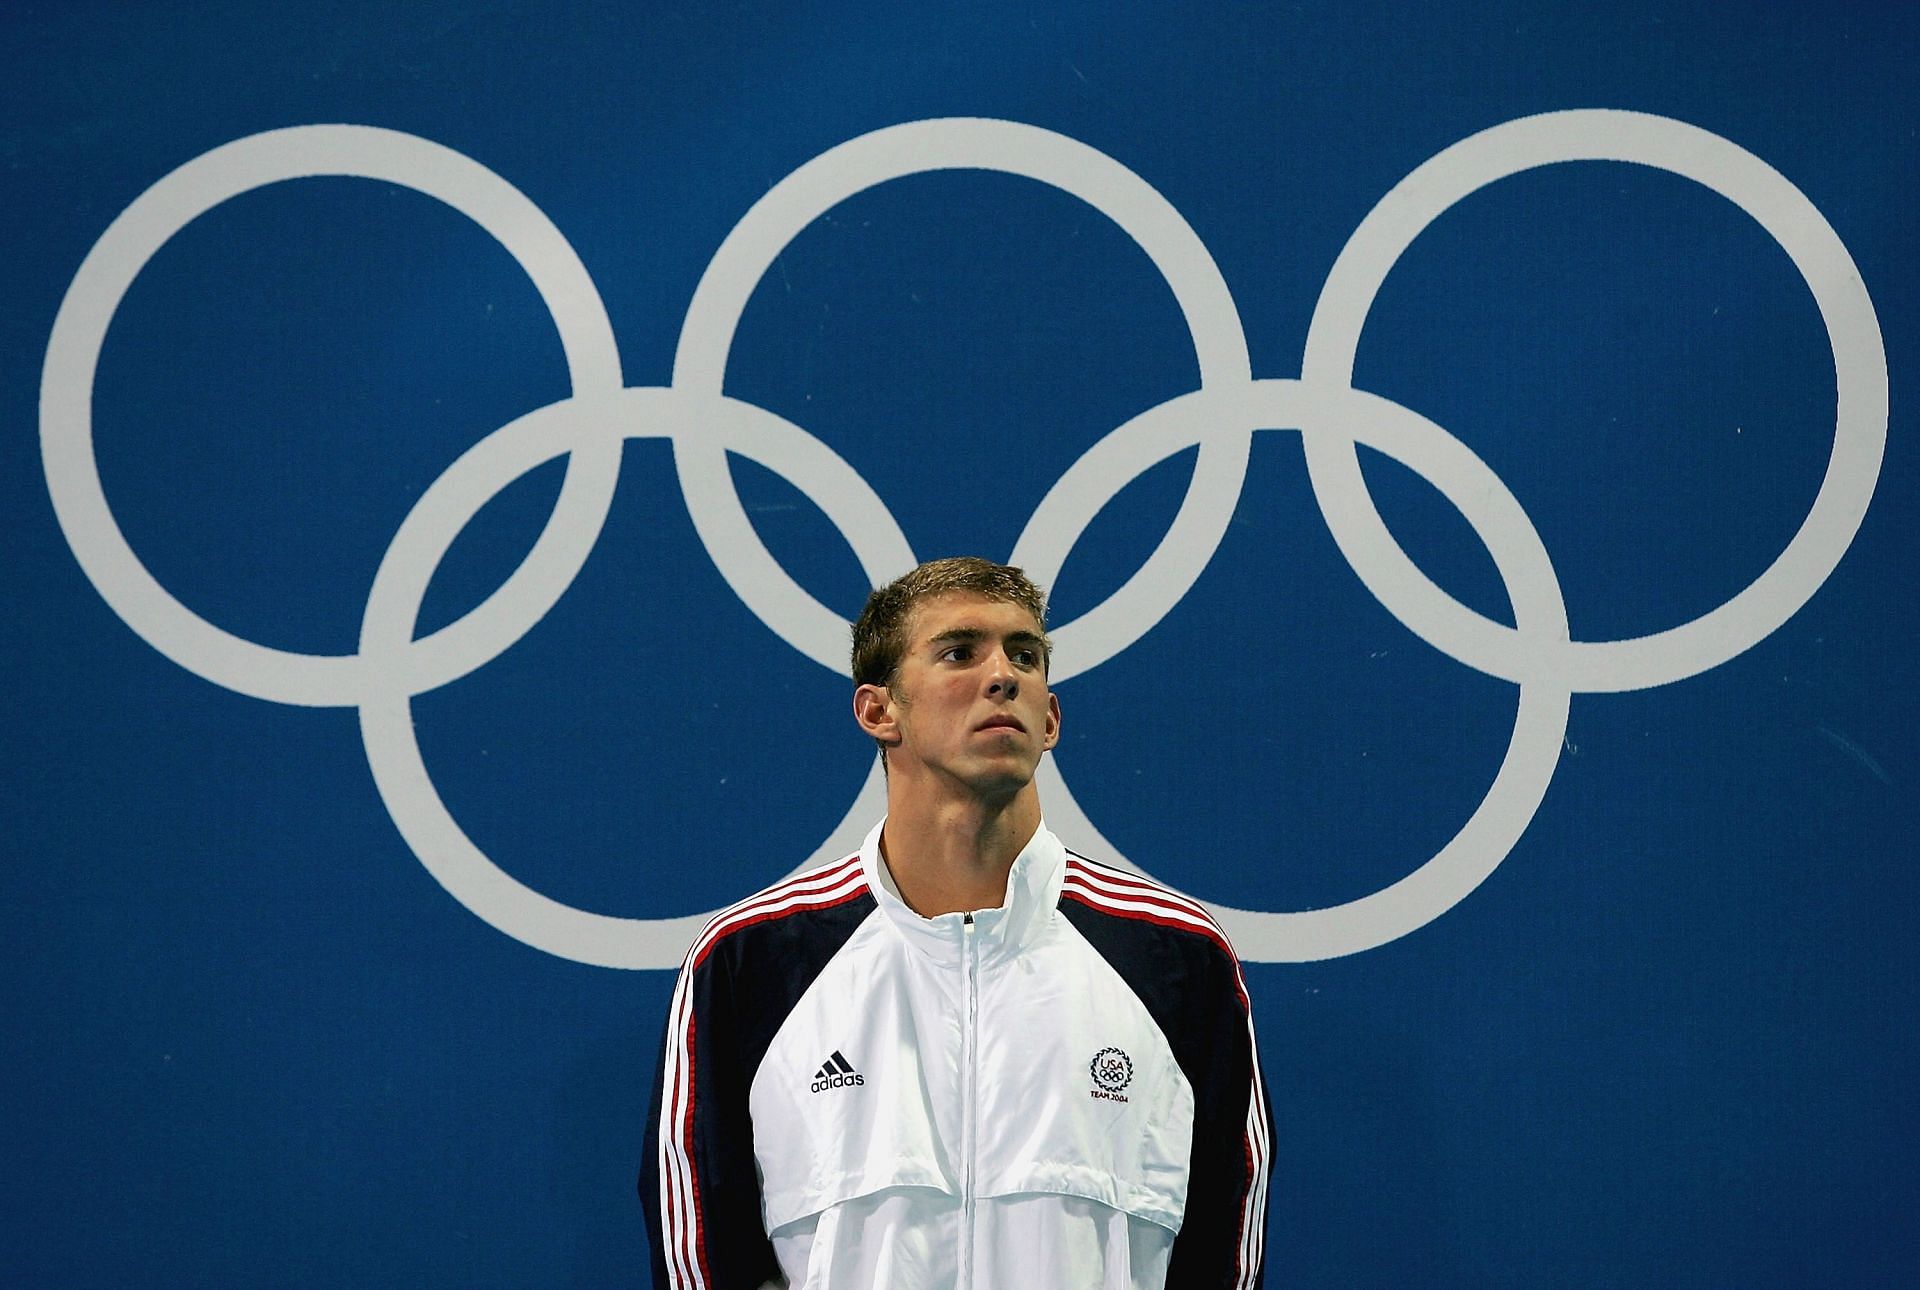 Michael Phelps during the Men&#039;s 100m Butterfly Medal Ceremony at the 2004 Summer Olympics